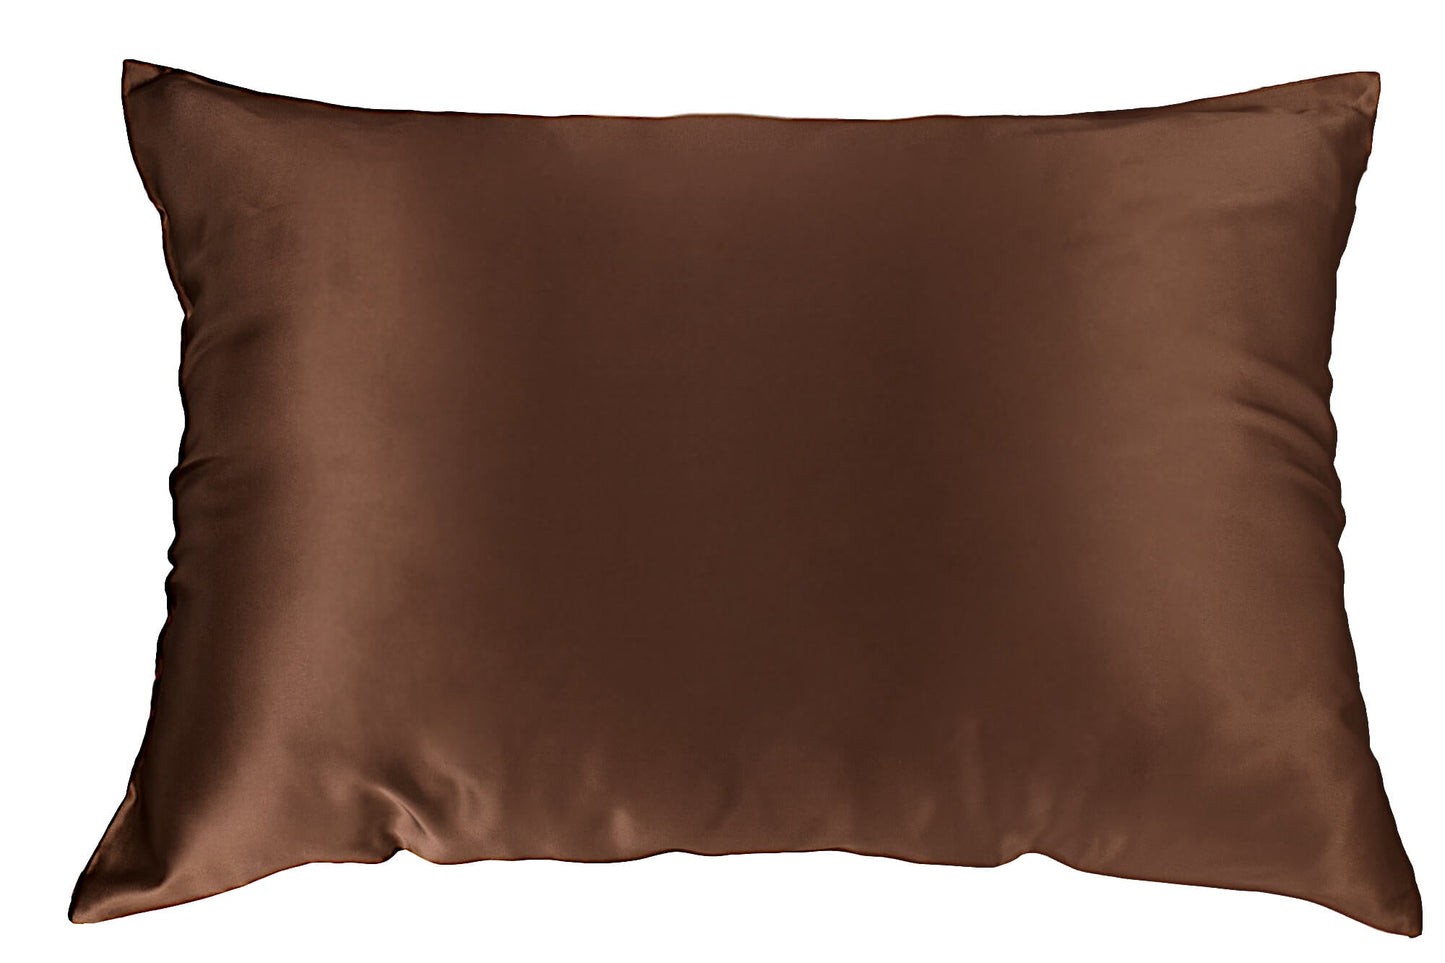 25 Momme Silk Pillowcase - King Chocolate Envelope Closure - Outlet